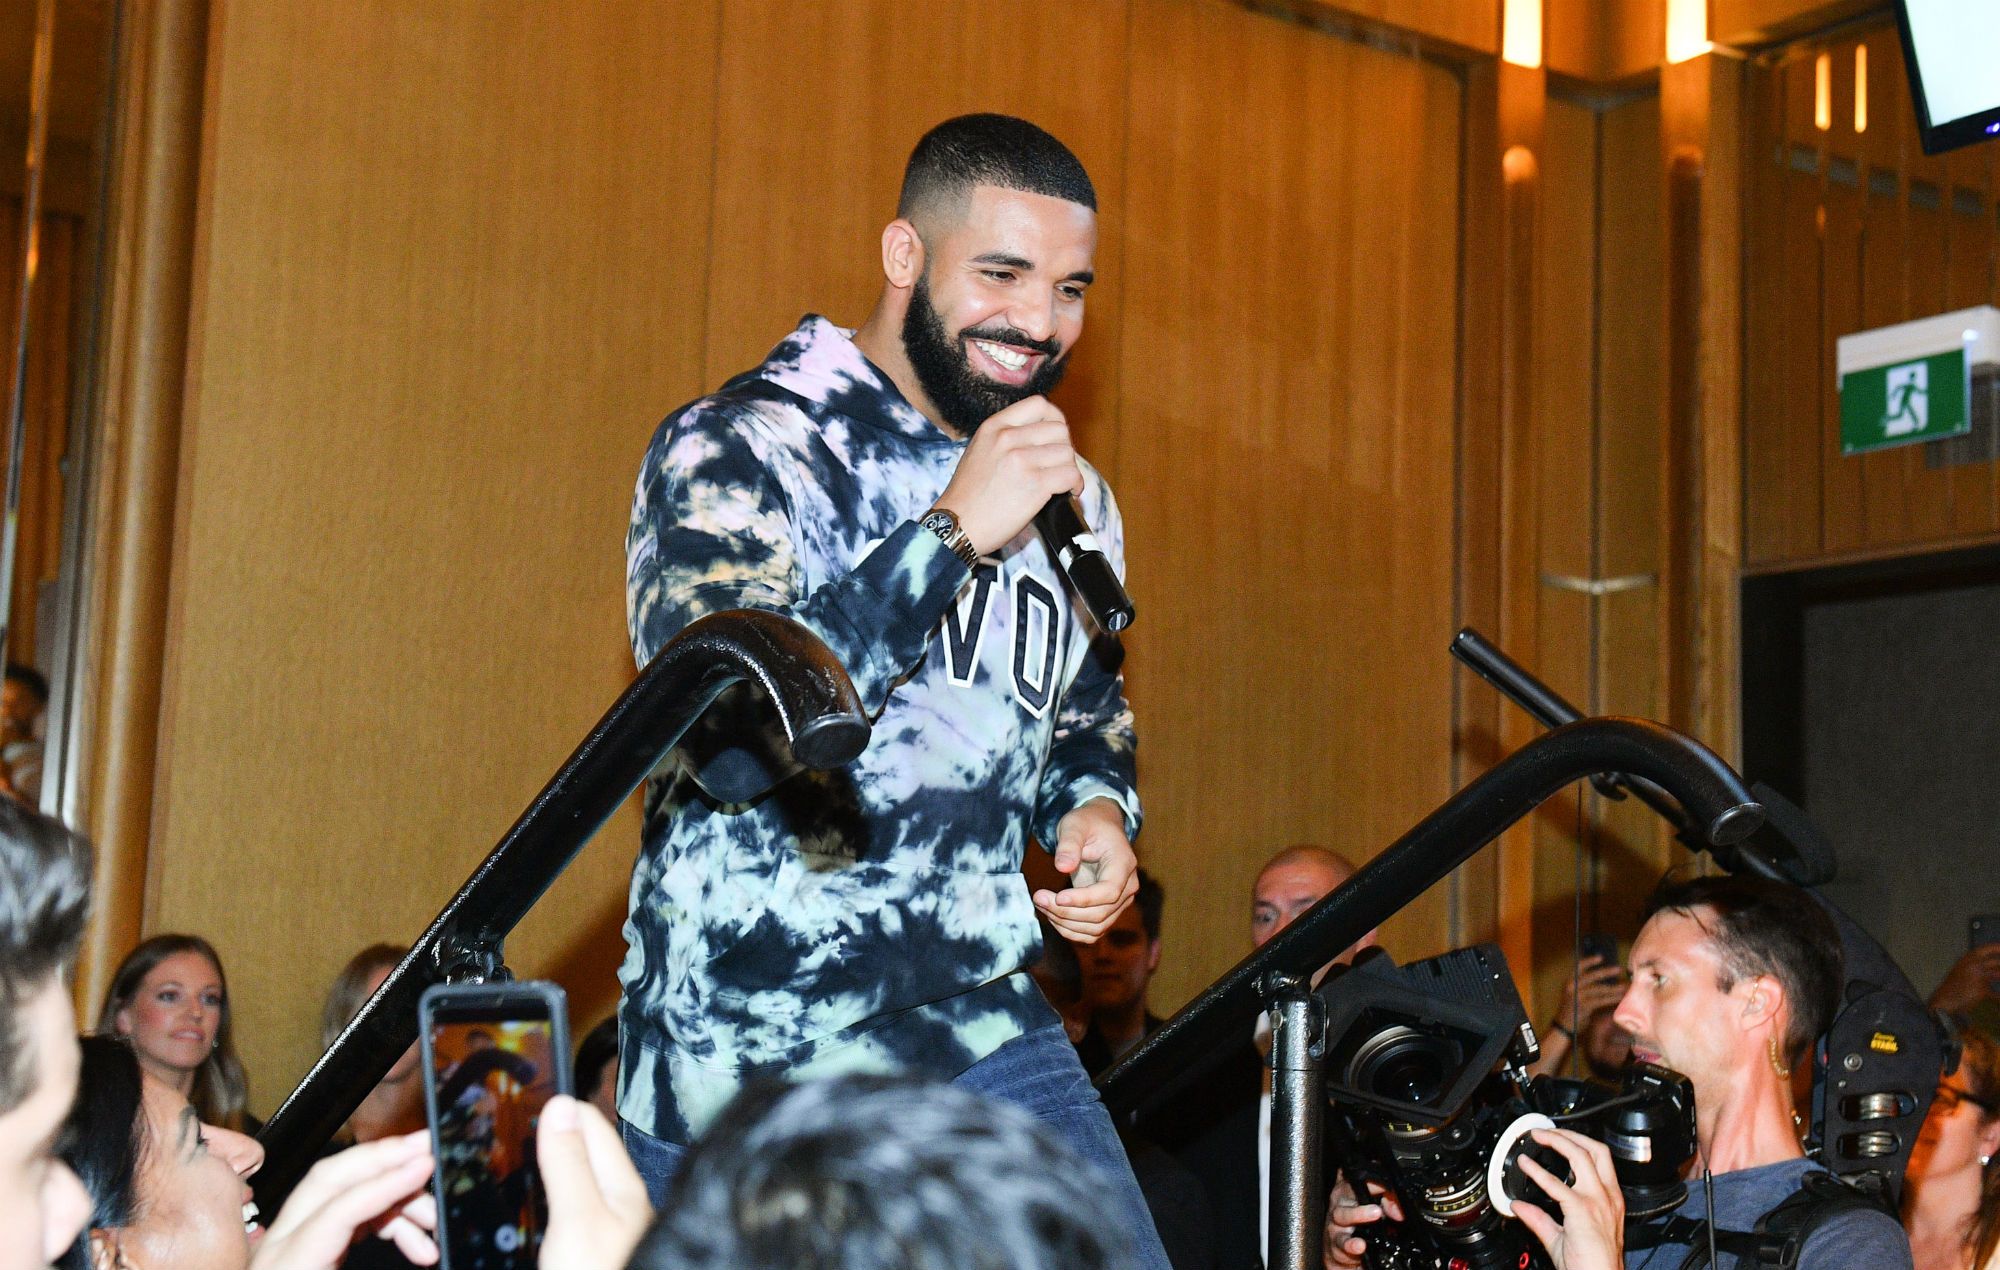 Drake expects people will hate on his new album 'Certified Lover Boy' like they did with 'Views'